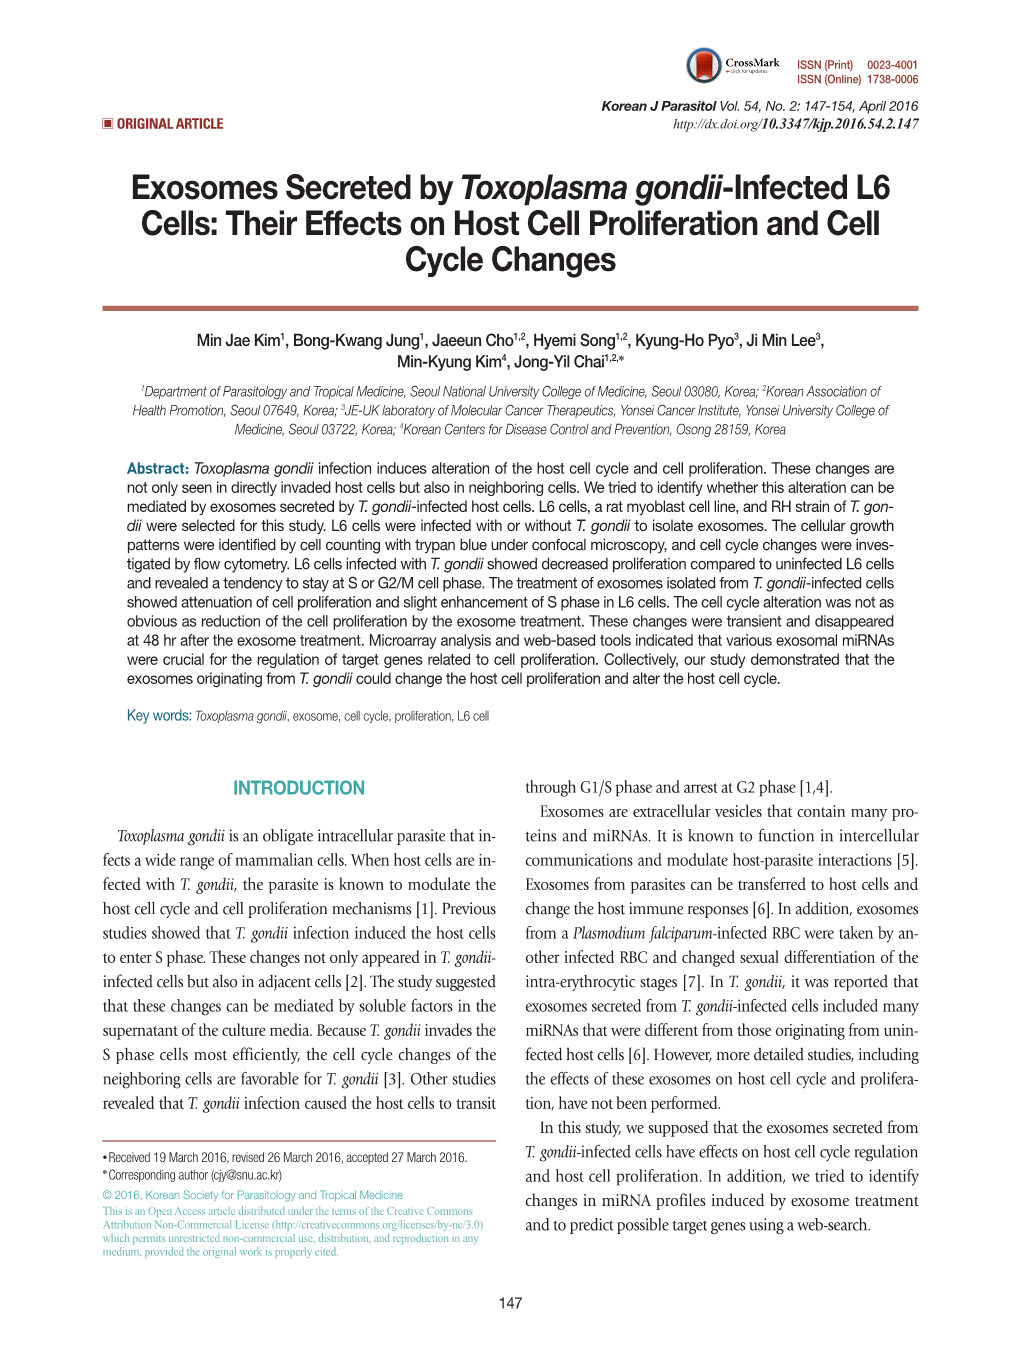 Their Effects on Host Cell Proliferation and Cell Cycle Changes